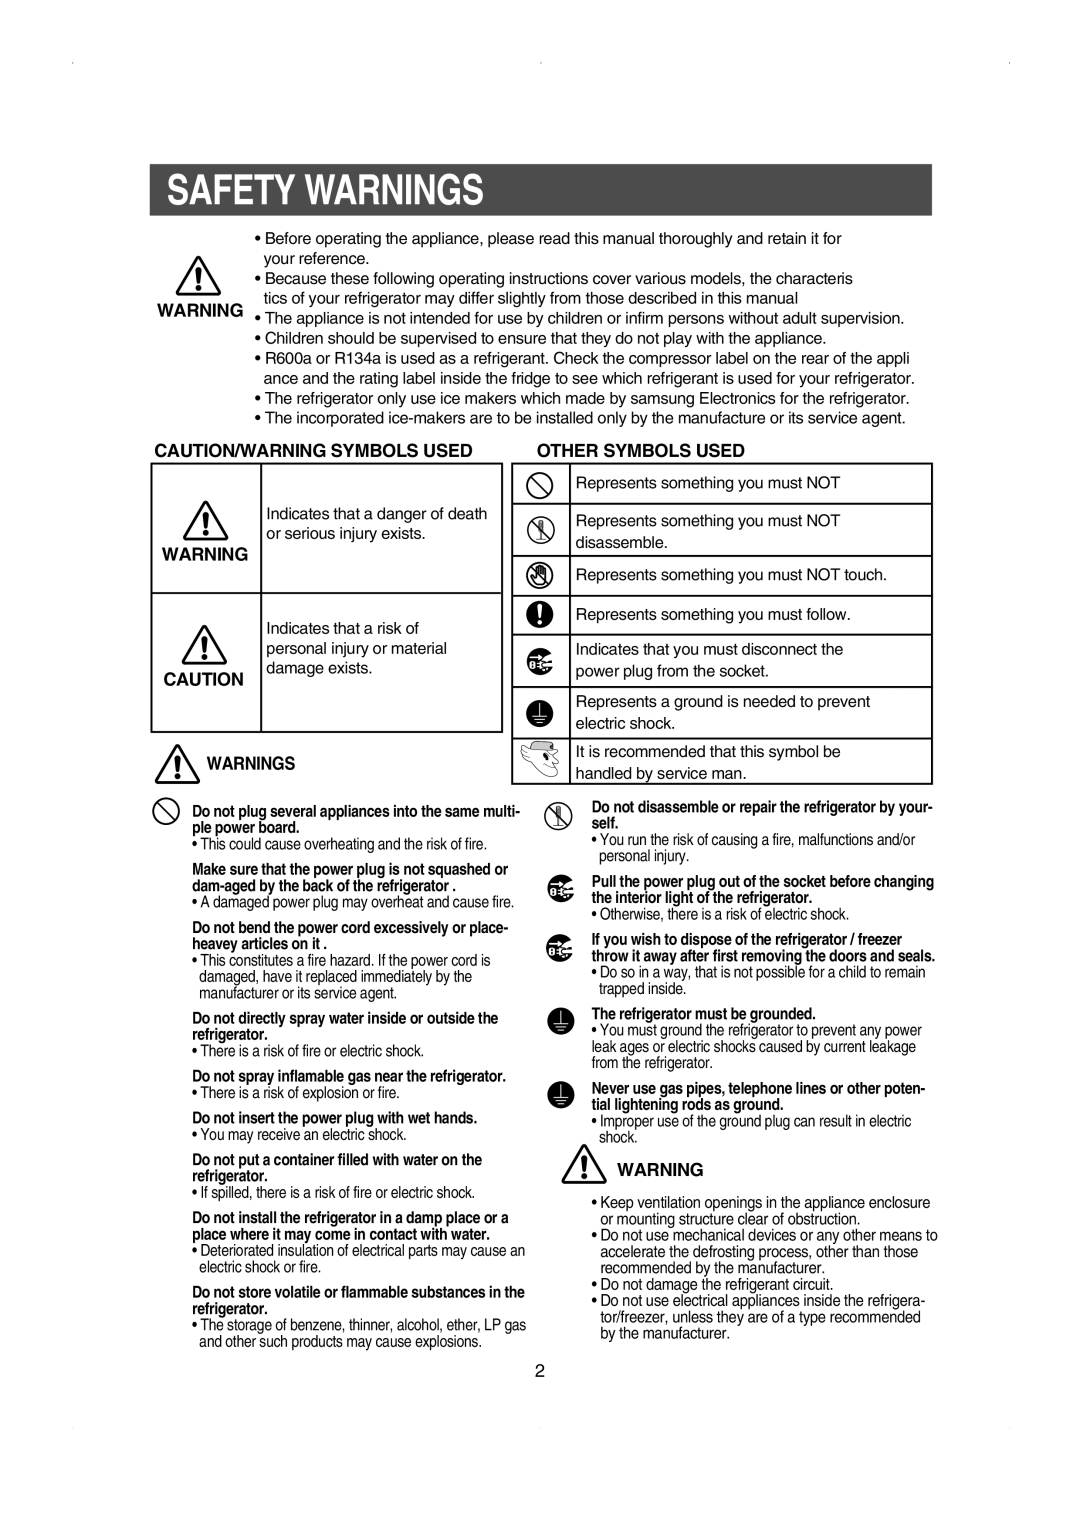 Samsung RS23FESW owner manual Safety Warnings, Caution/Warning Symbols Used, Other Symbols Used 